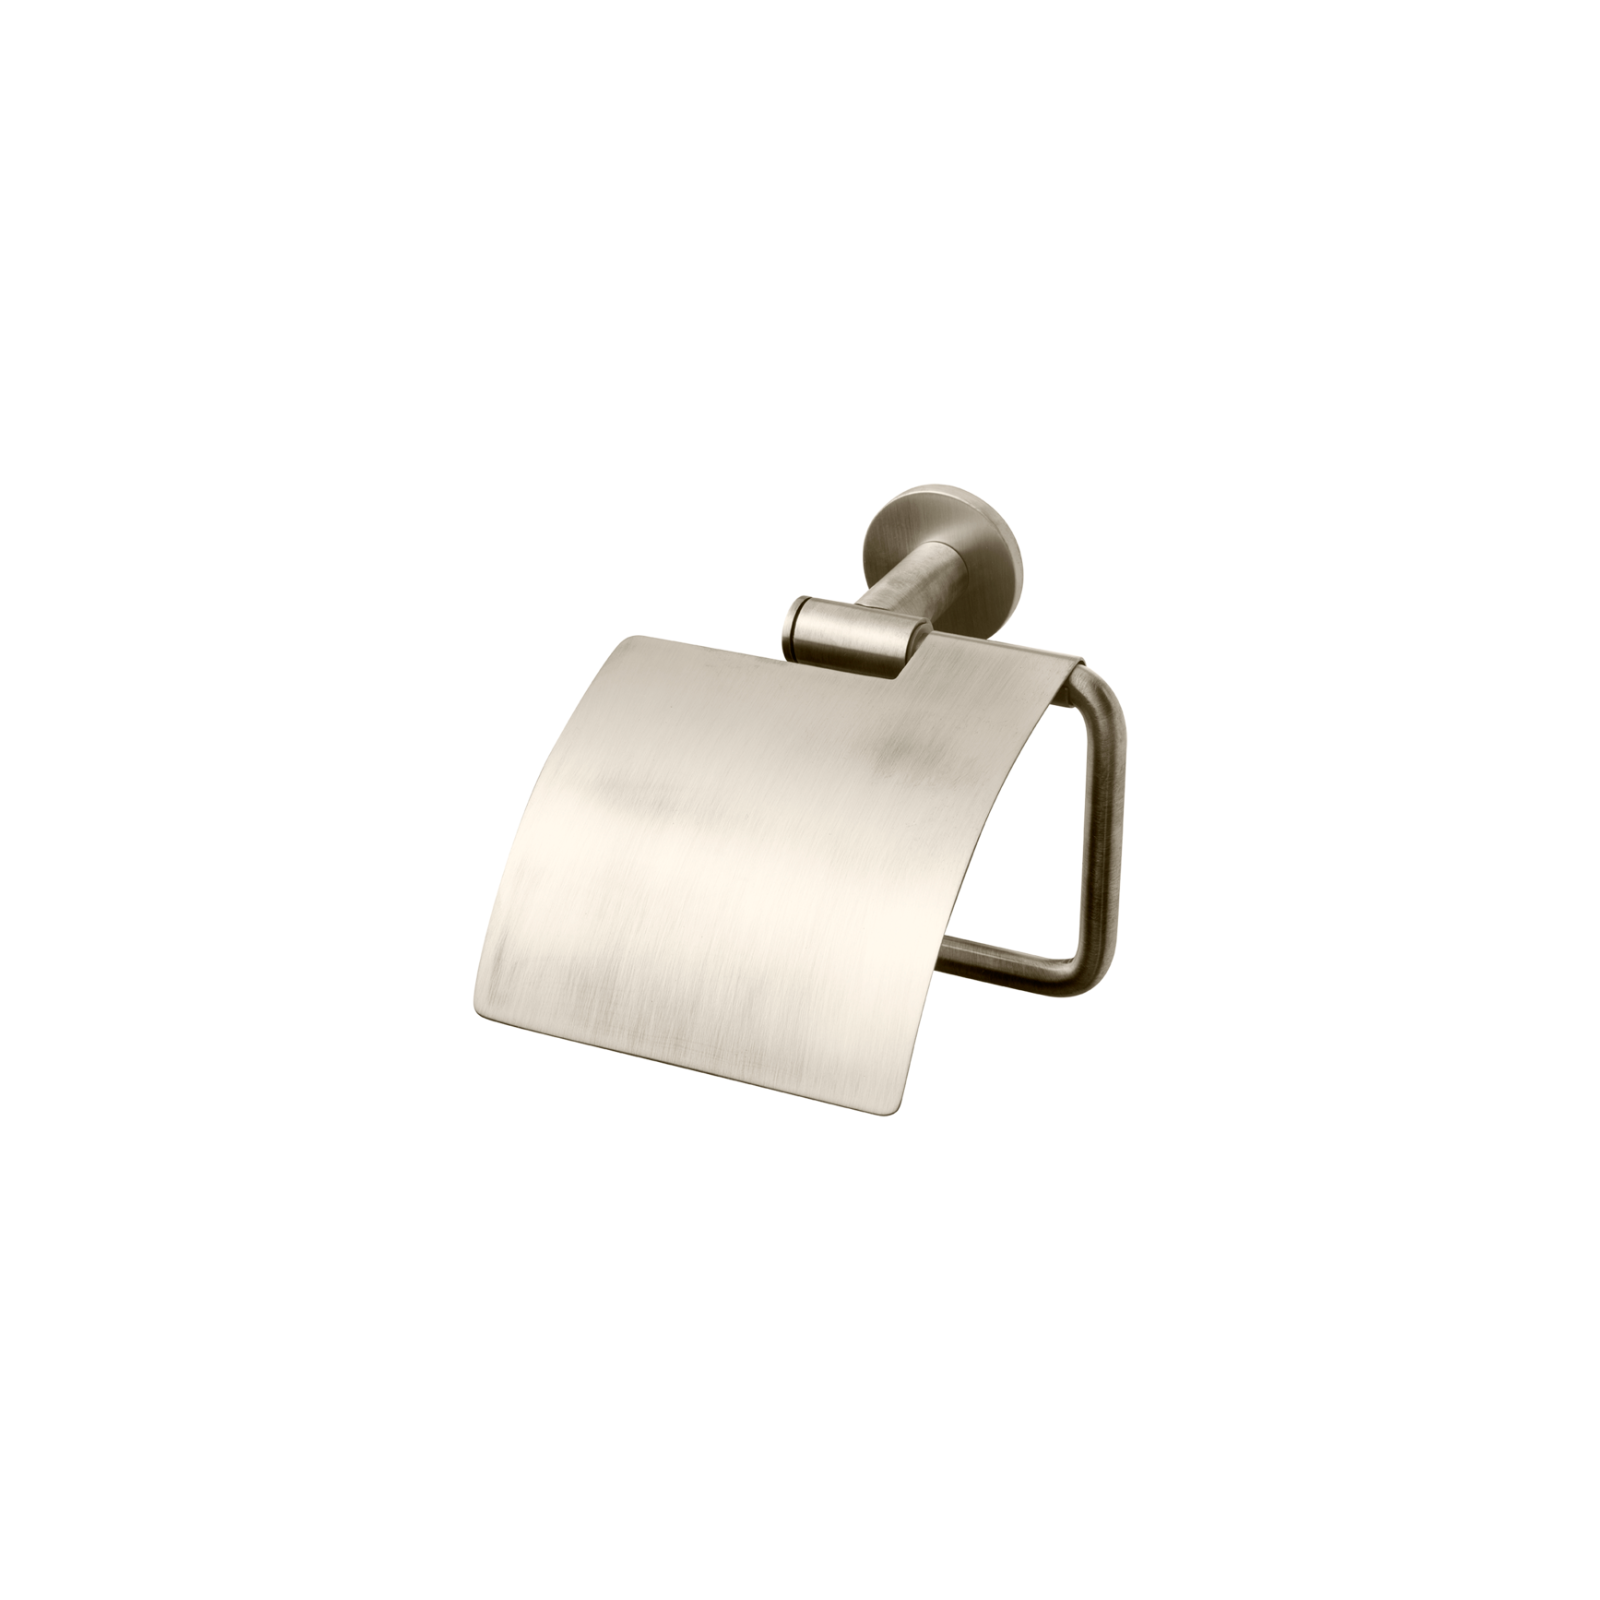 Tapwell Toalettpappershållare med lock TA236 Brushed Nickel